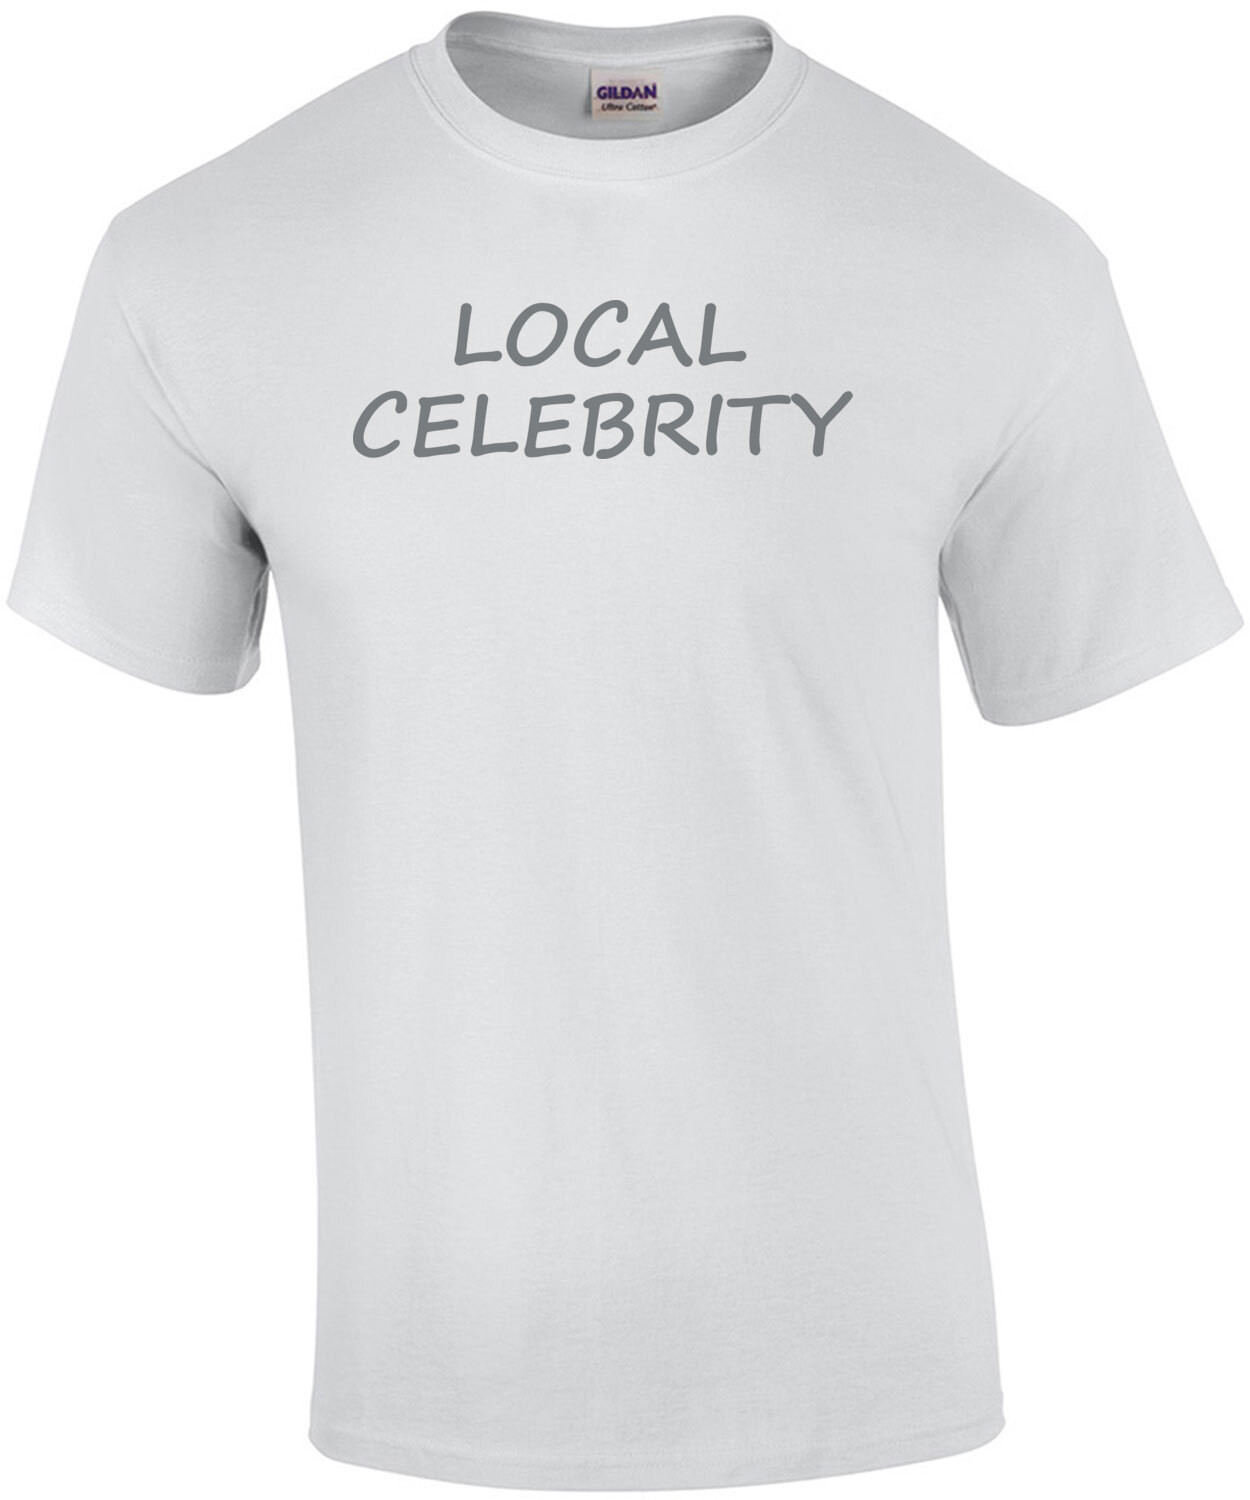 LOCAL CELEBRITY T-Shirt